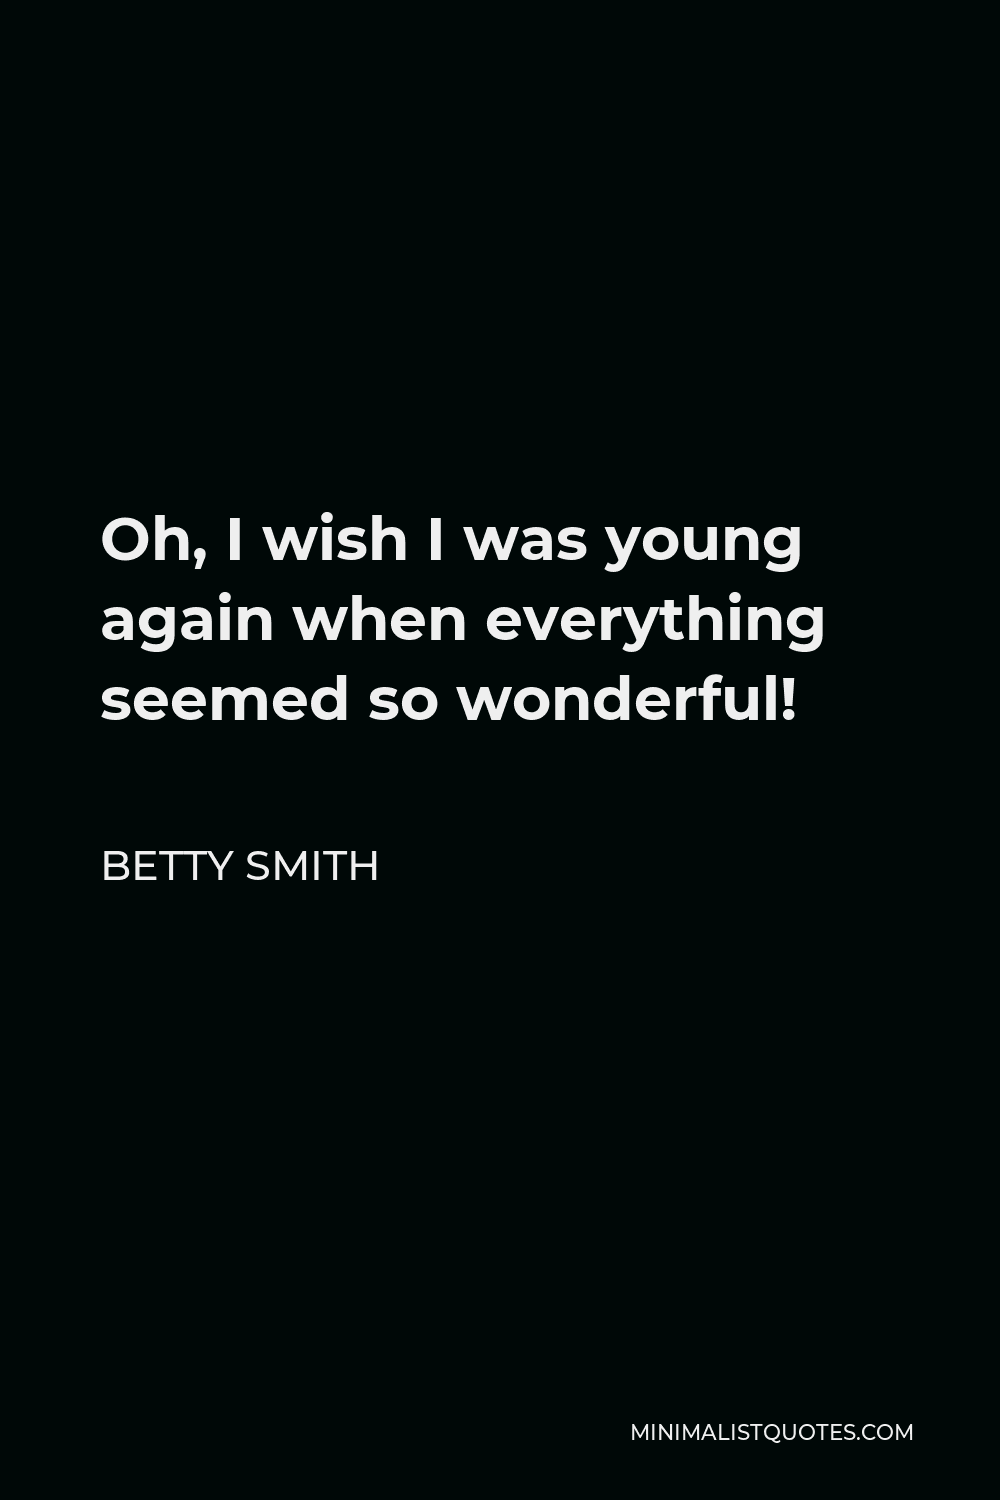 Betty Smith Quote - Oh, I wish I was young again when everything seemed so wonderful!